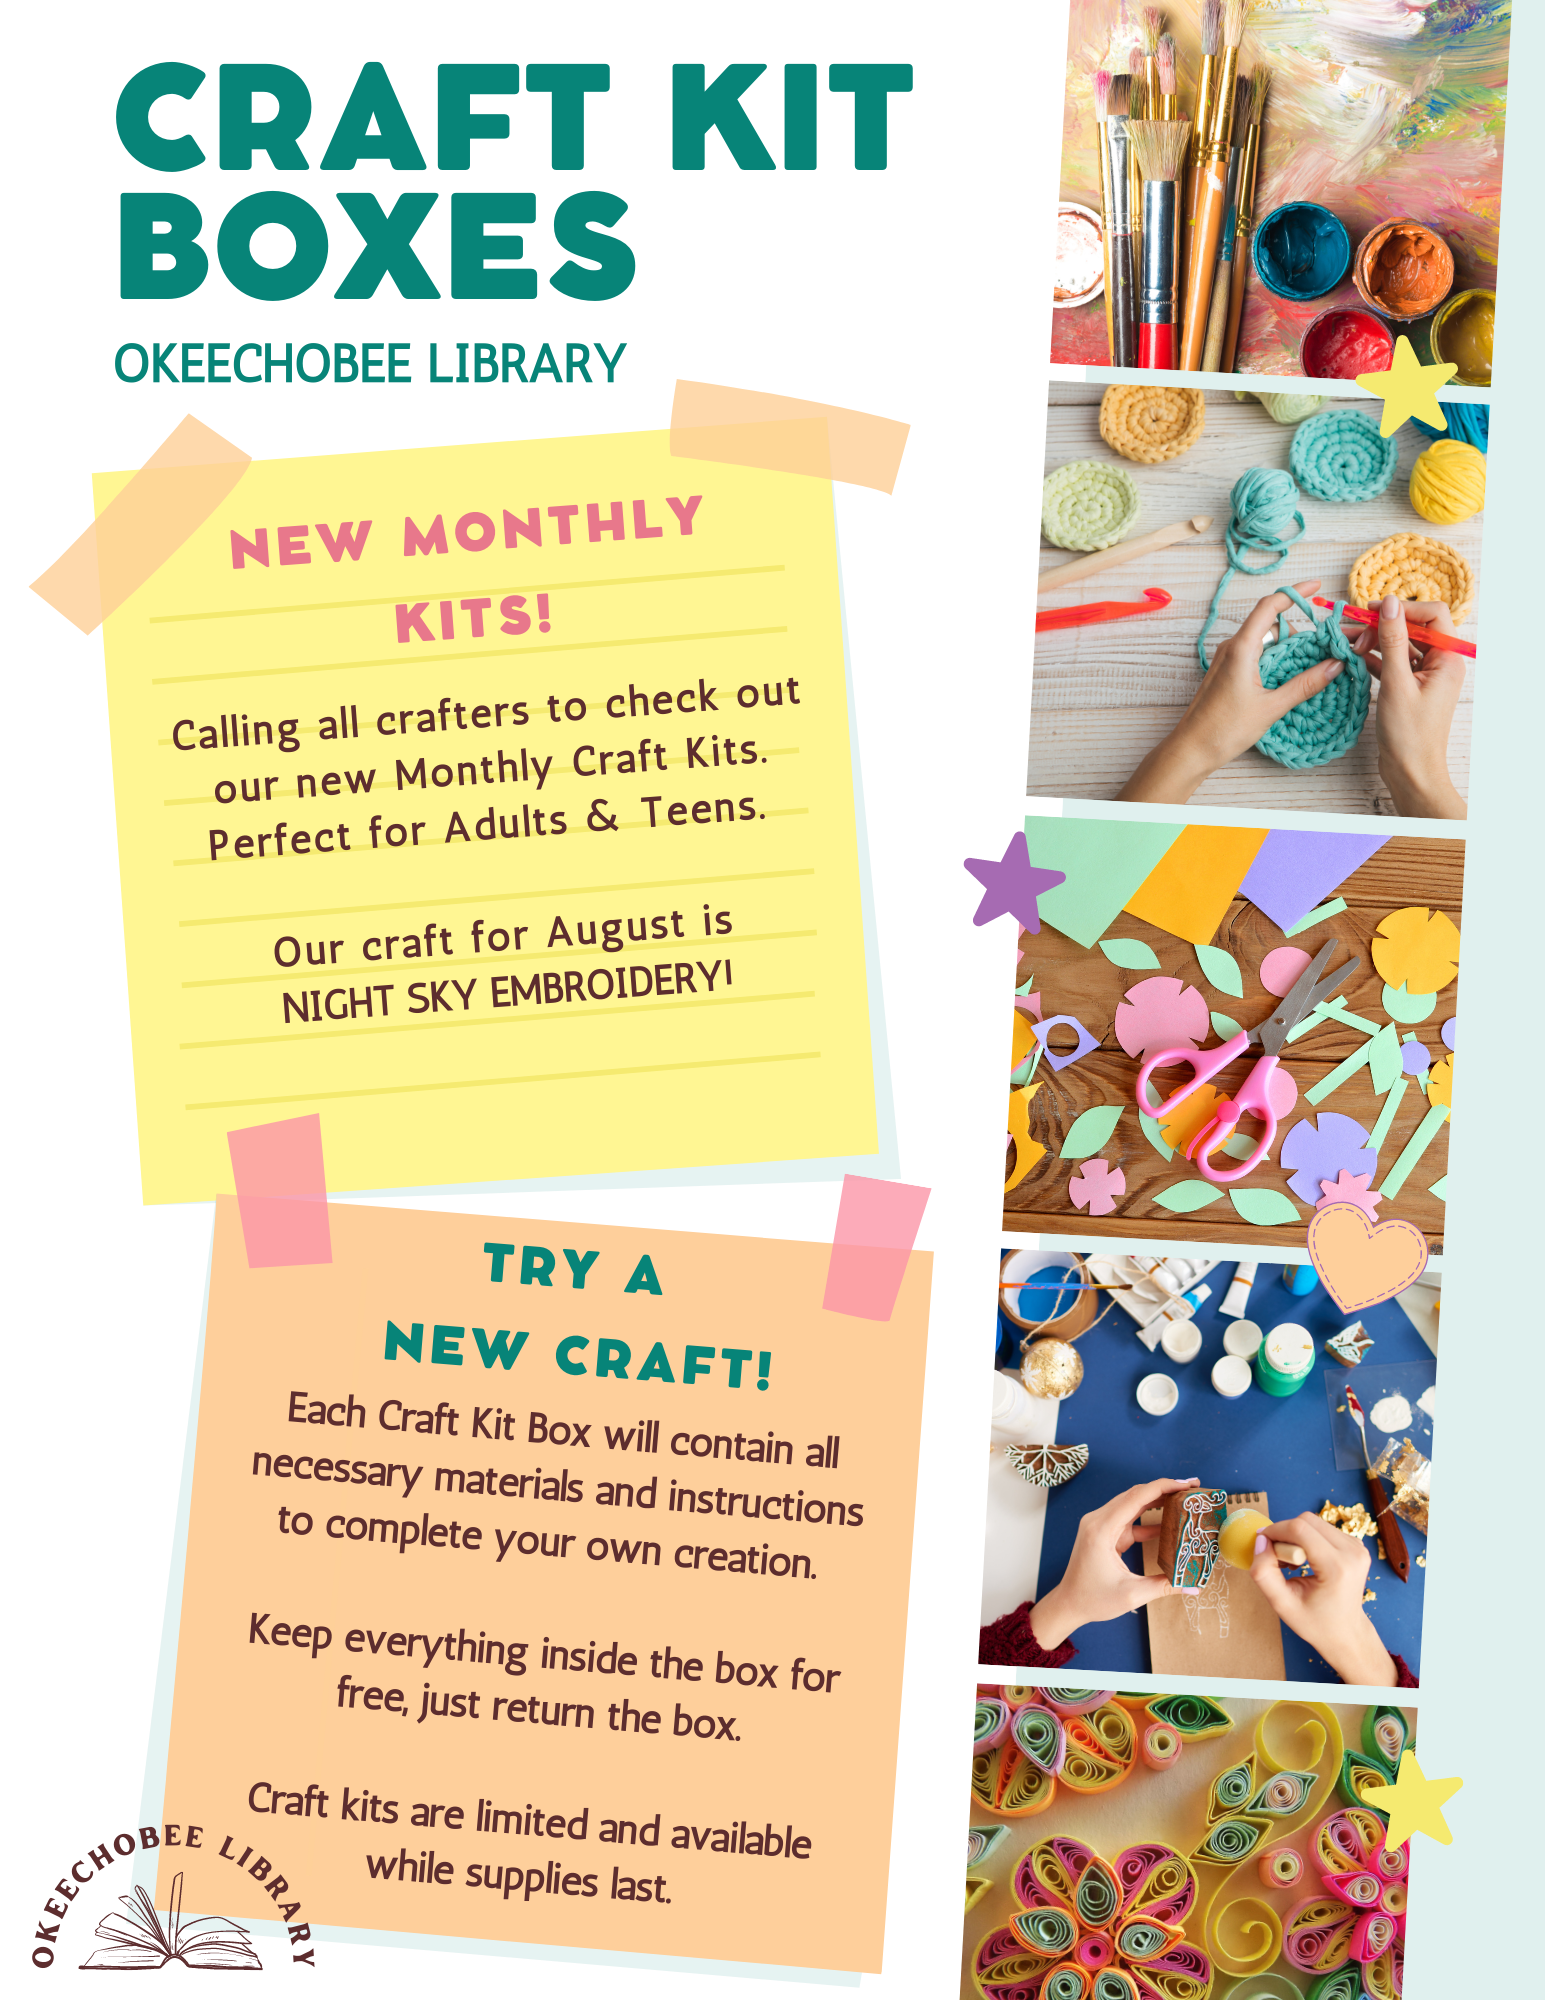 Our craft for August is a Night Sky Embroidery. Each Craft Kit Box will contain all necessary materials and instructions to complete your own creation.